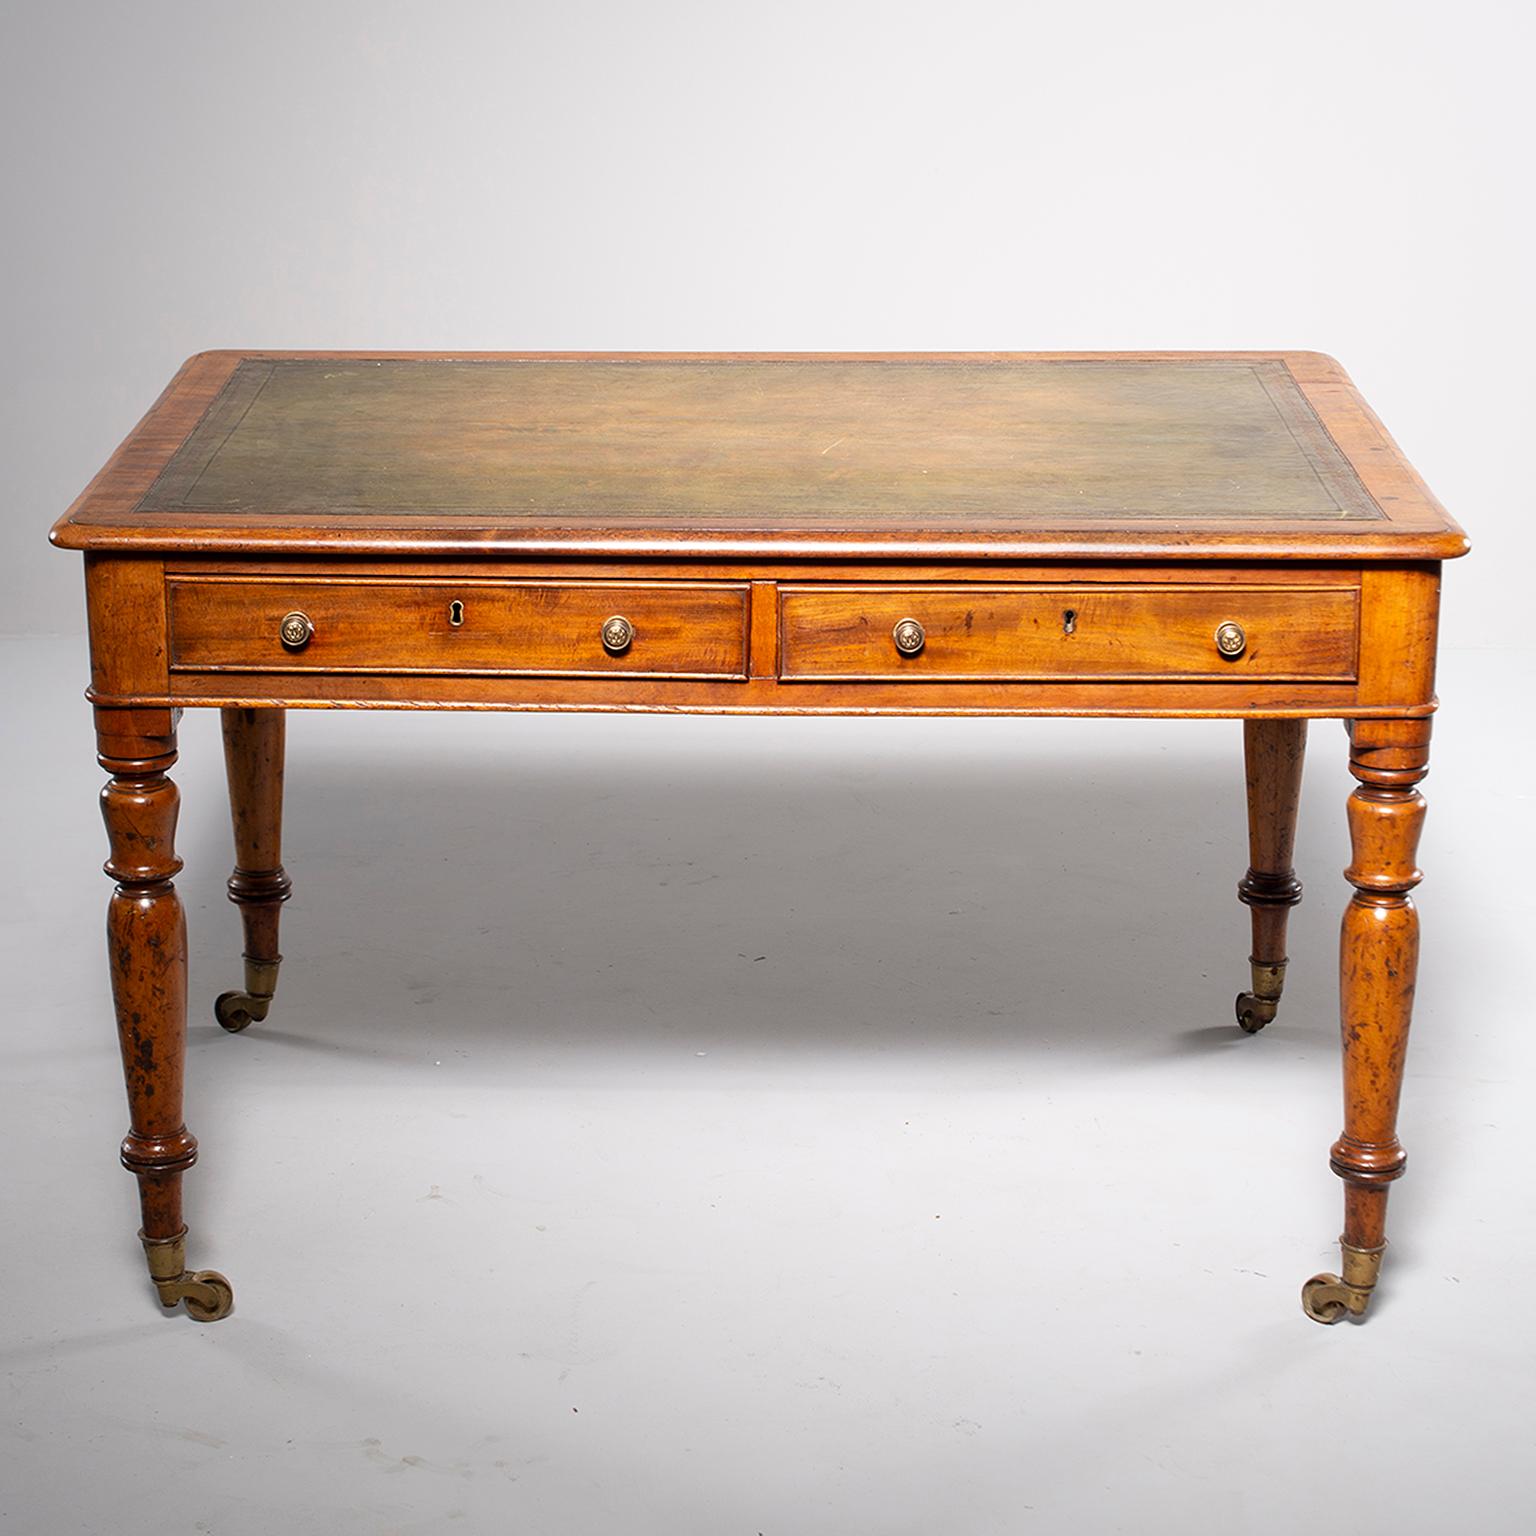 Georgian partner’s desk is made of mahogany with turned legs on casters, two functional drawers on both sides and a new green leather top with embossed edges, circa 1870s. Overall excellent antique condition.